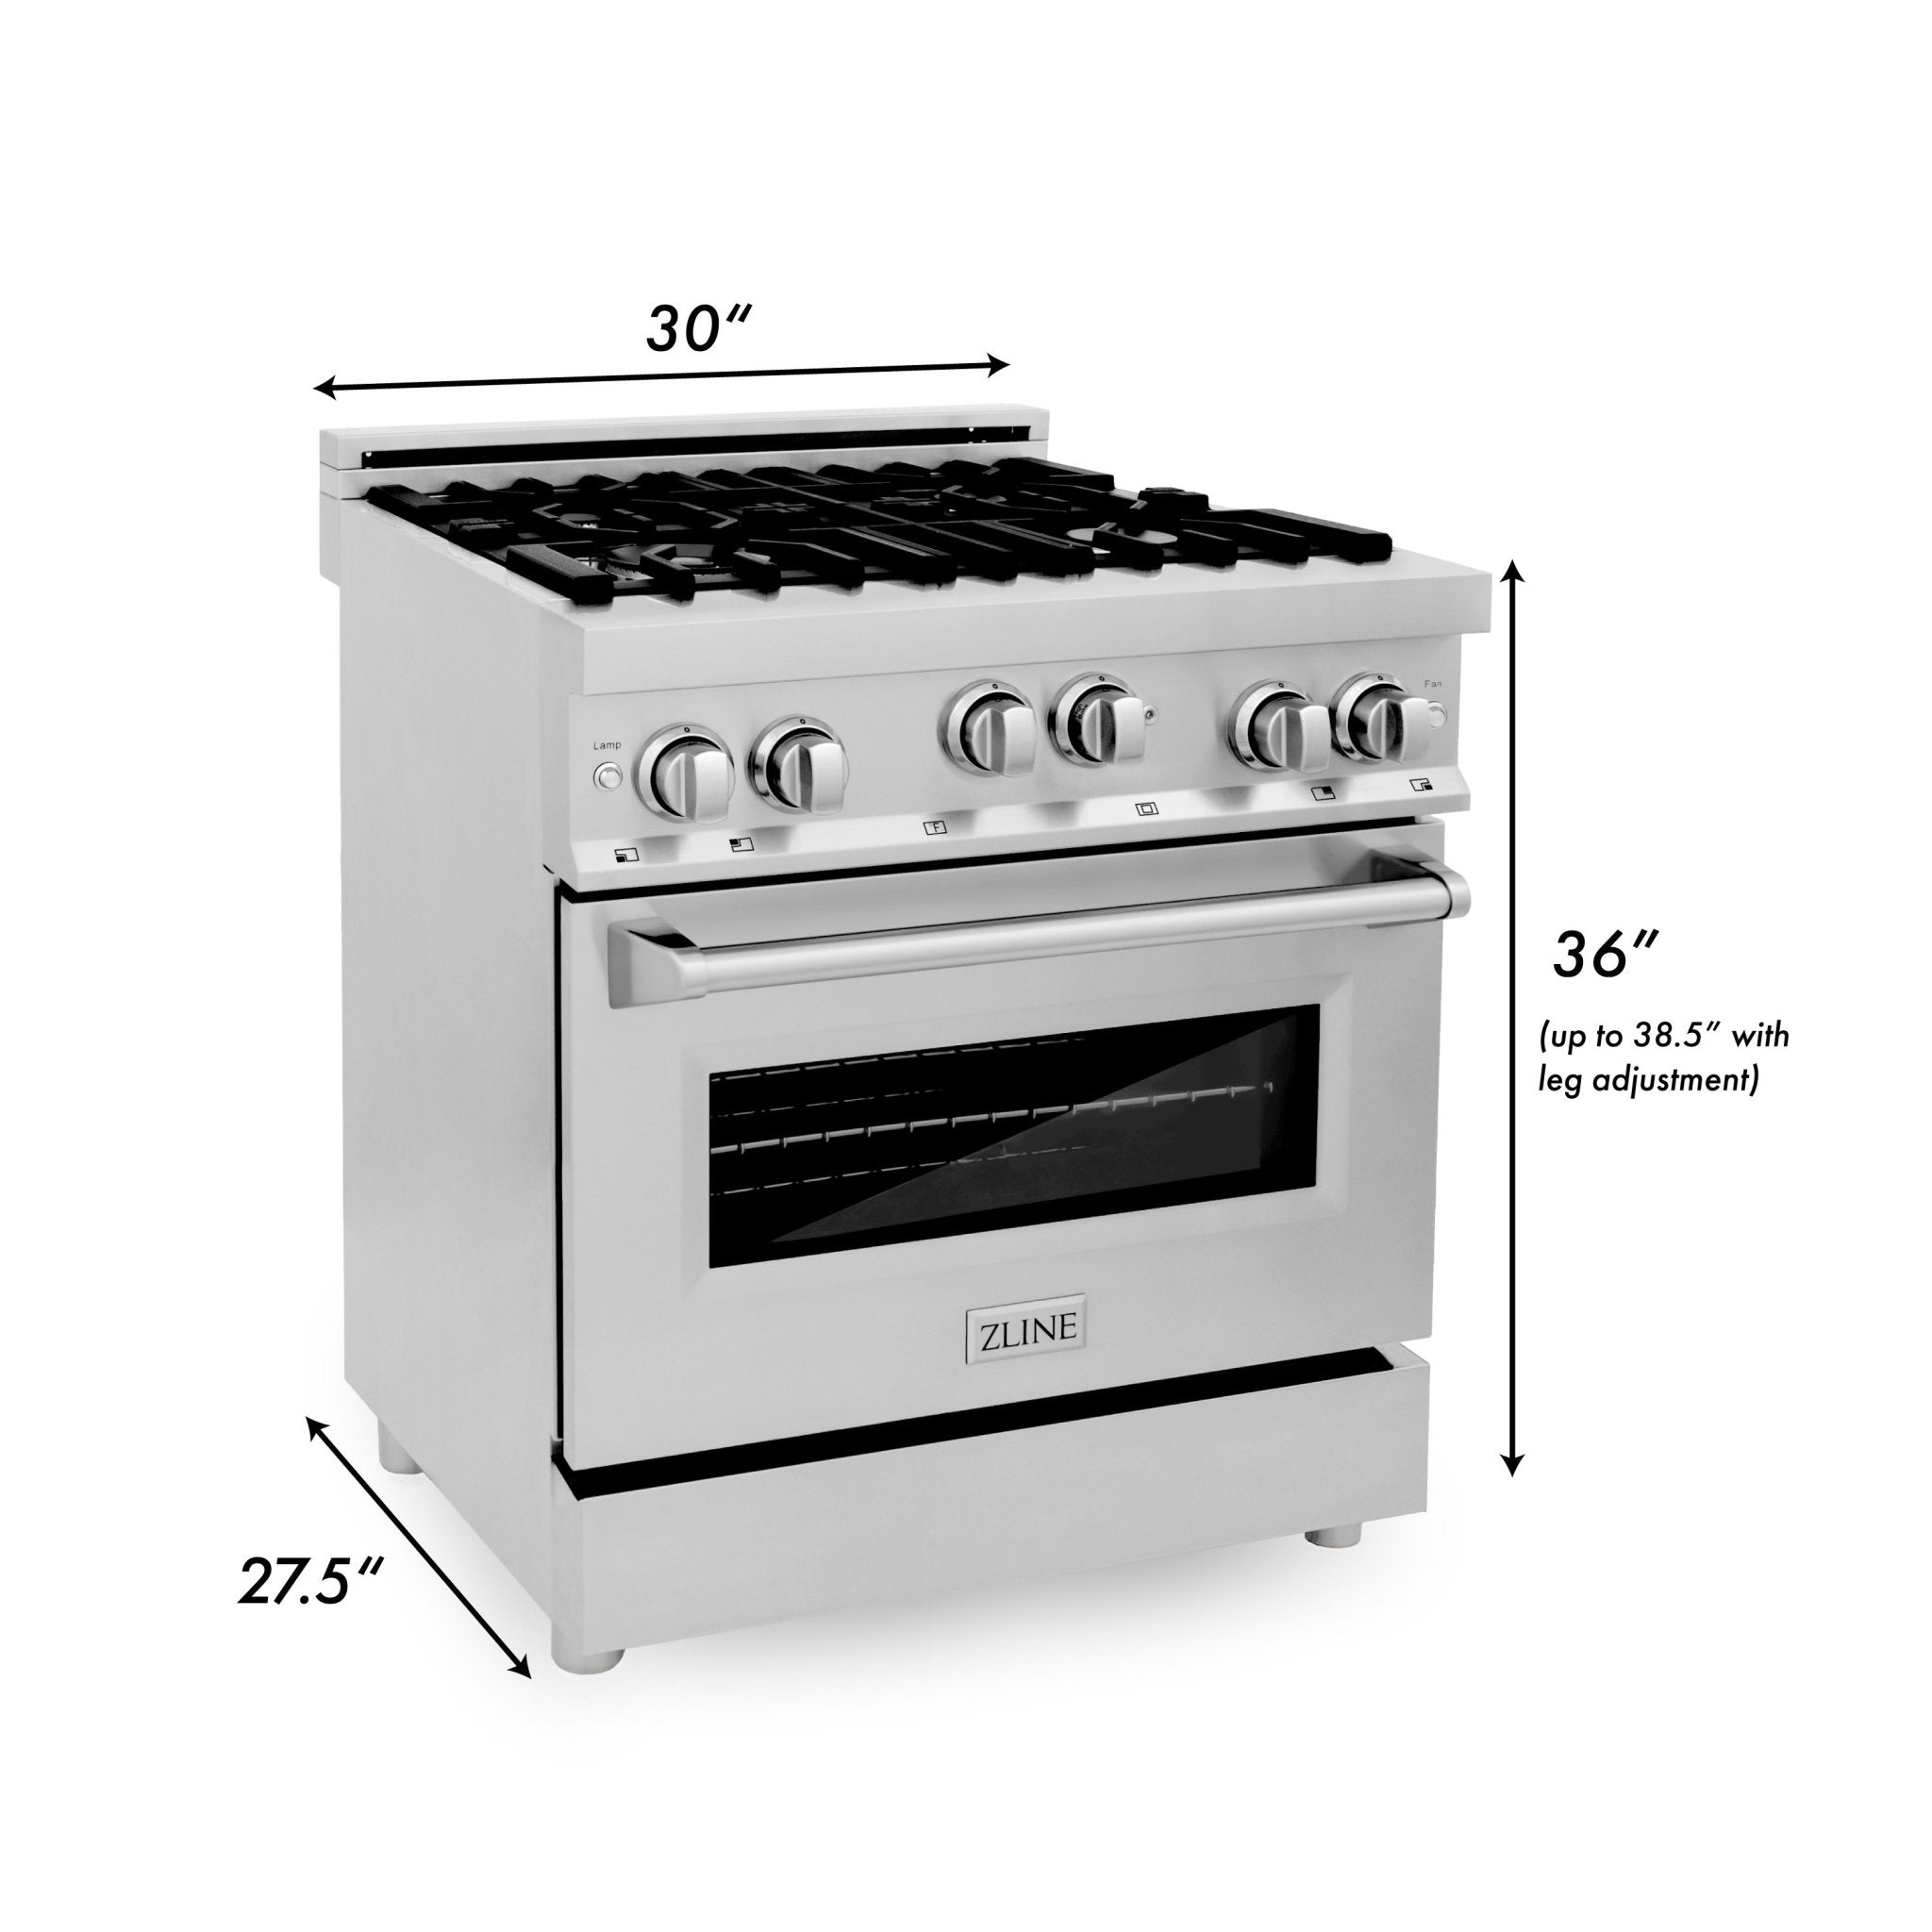 ZLINE 30" Professional Gas on Gas Range in Stainless Steel with Color Door Options - Rustic Kitchen & Bath - Ranges - ZLINE Kitchen and Bath